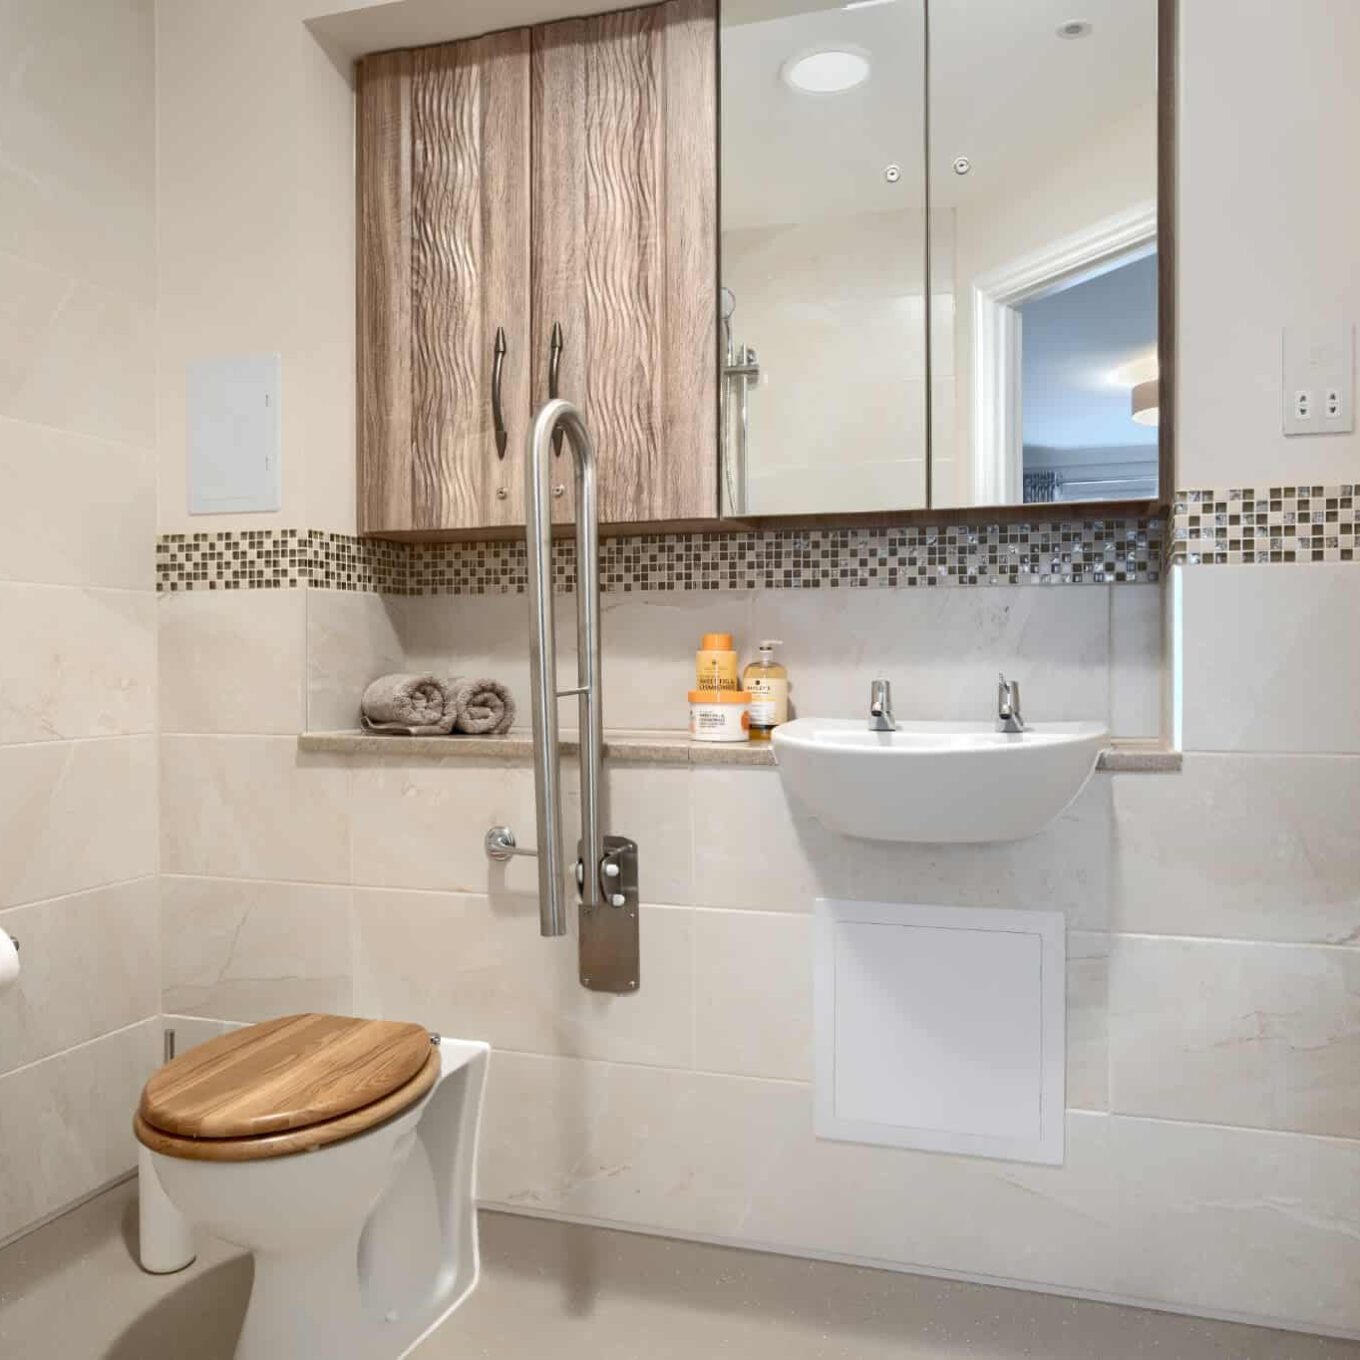 Bathroom with toilet, sink and cupboards at Elmbook Court Care Home